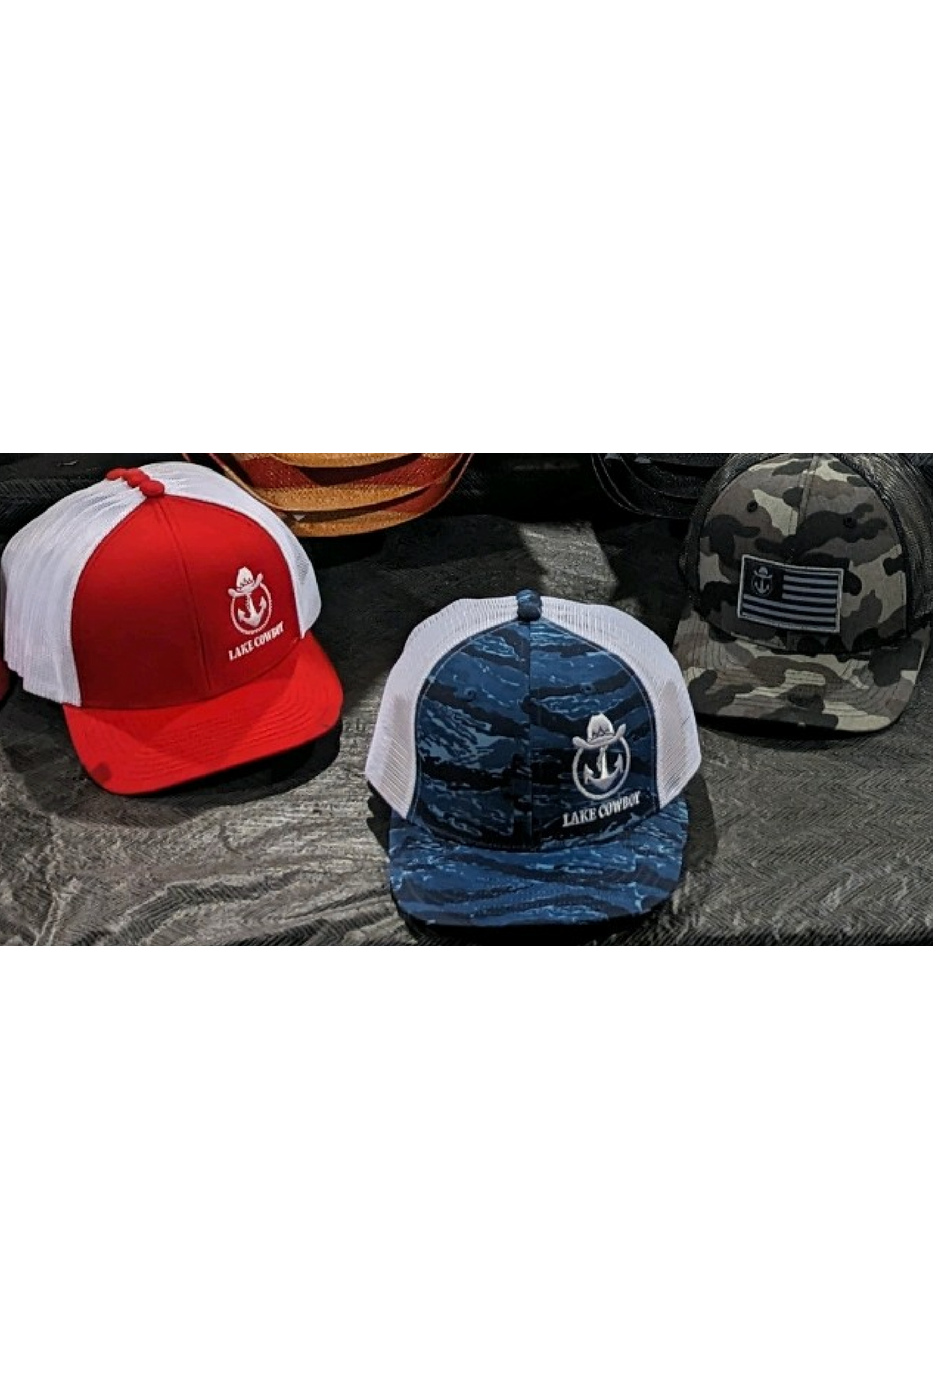 Photo of Lake Cowboy Blue Water Camo Hat with Other Hats